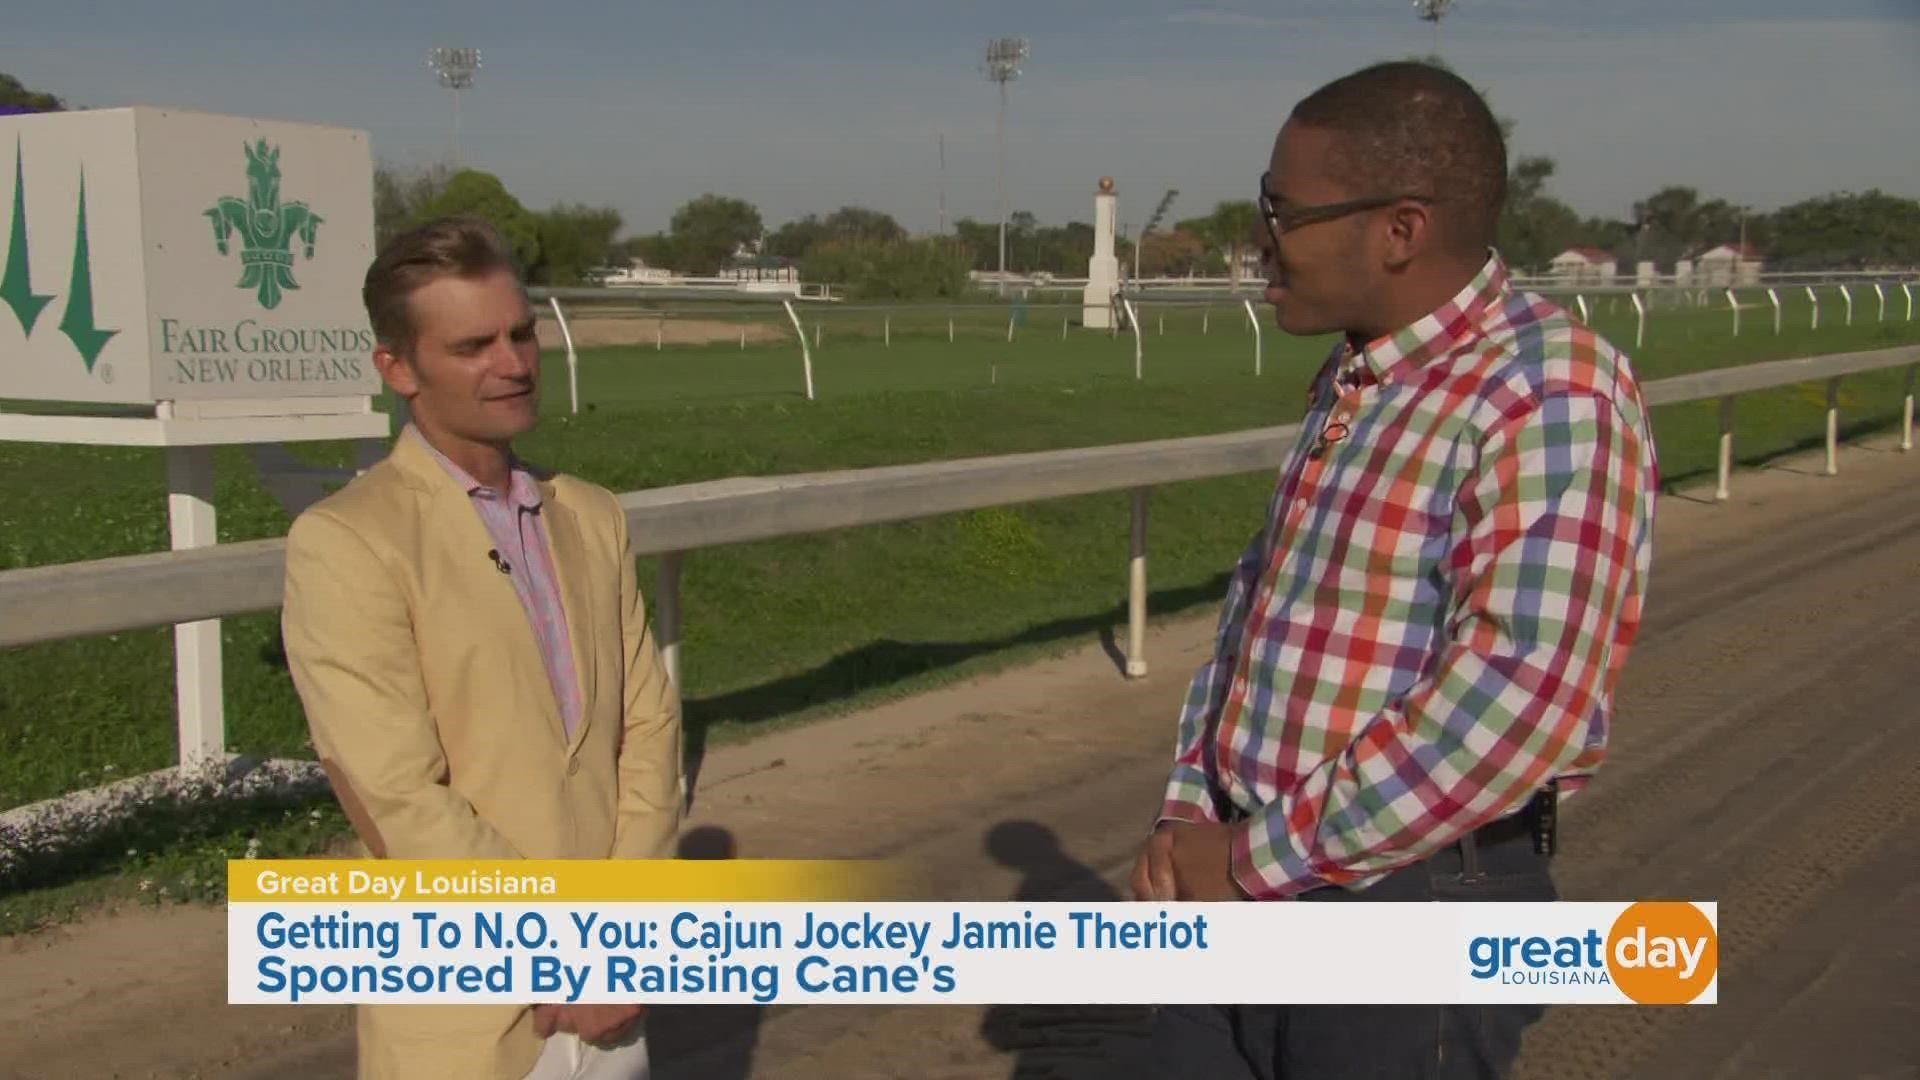 Malik interviews Jamie Theriot, a Cajun Jockey, in this Getting to N.O. You segment. He'll be racing this Thanksgiving at the New Orleans Fairgrounds.